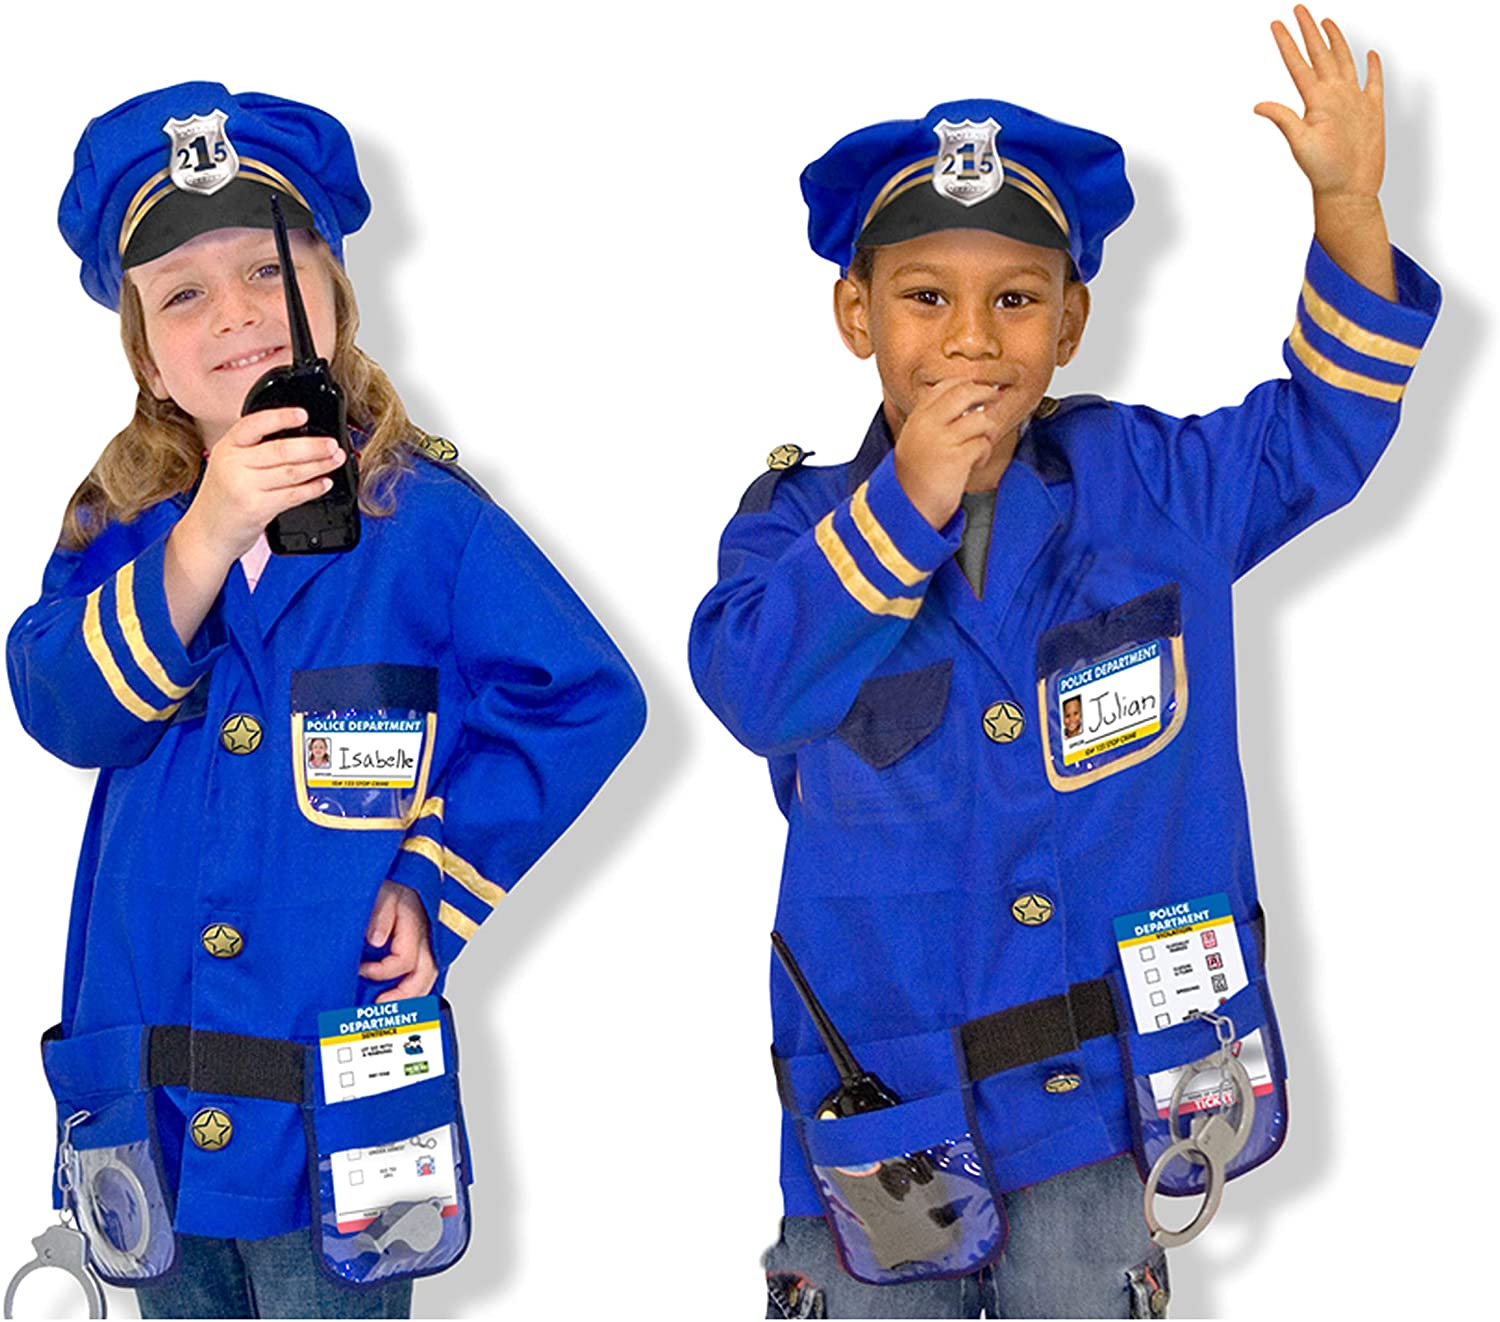 Police Officer Role Play Costume Set 3-6 Years